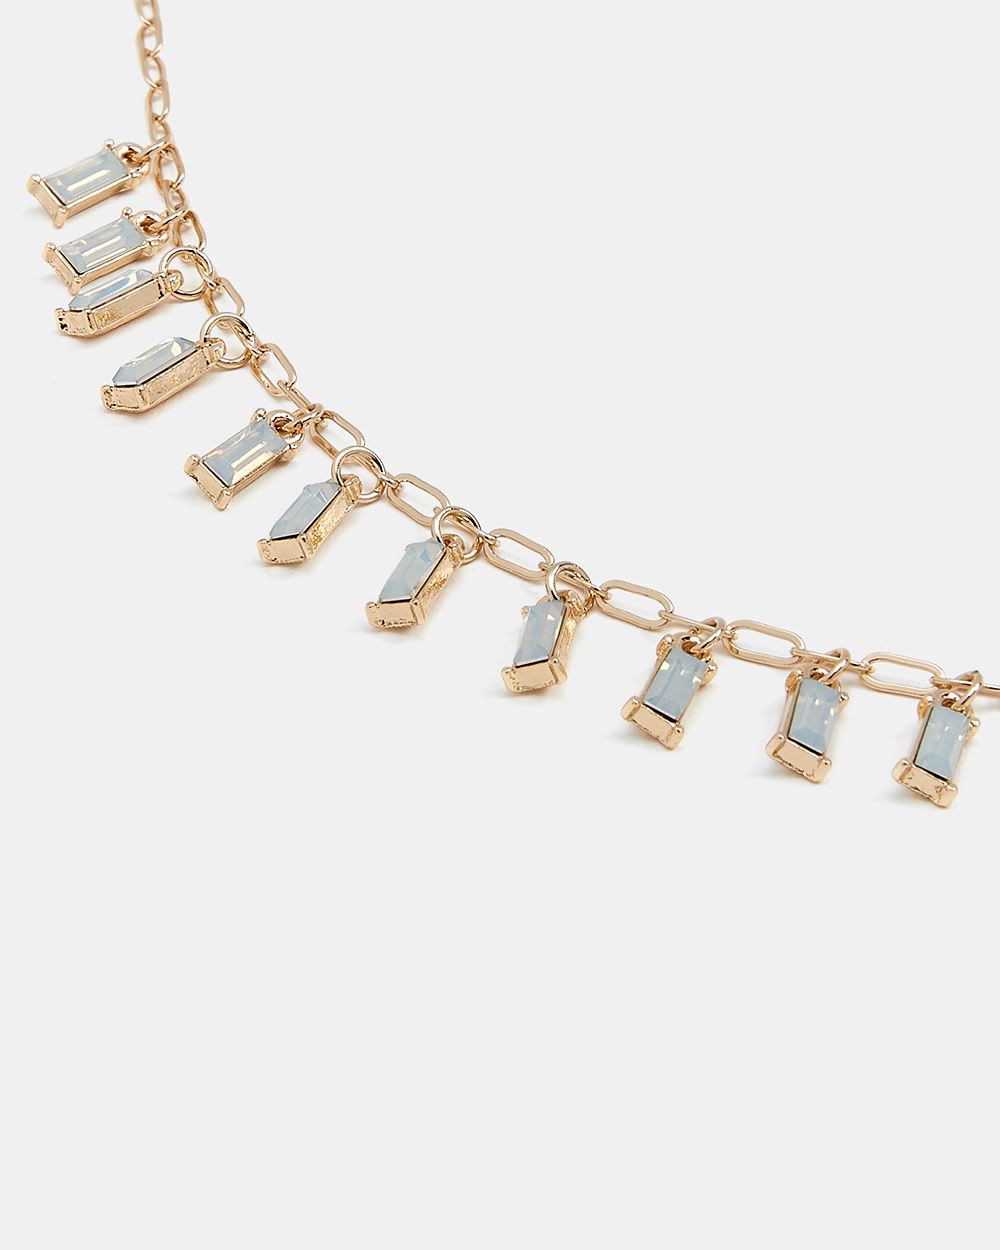 Gold Chain Necklace with Glass Stones